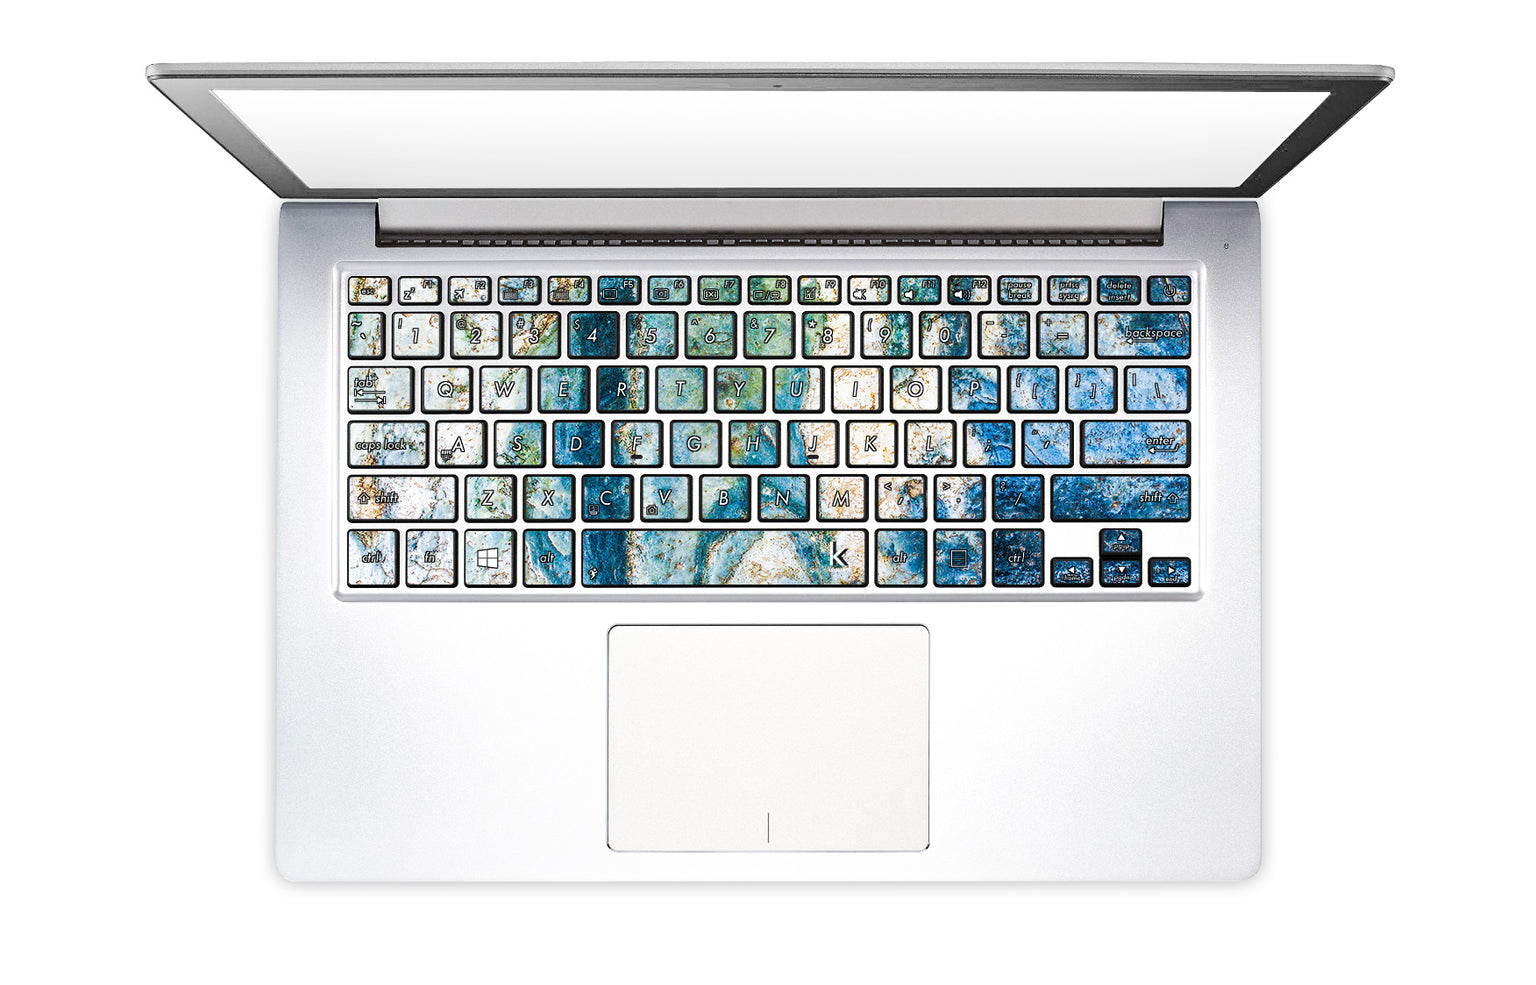 Colosseum Marble Laptop Keyboard Stickers